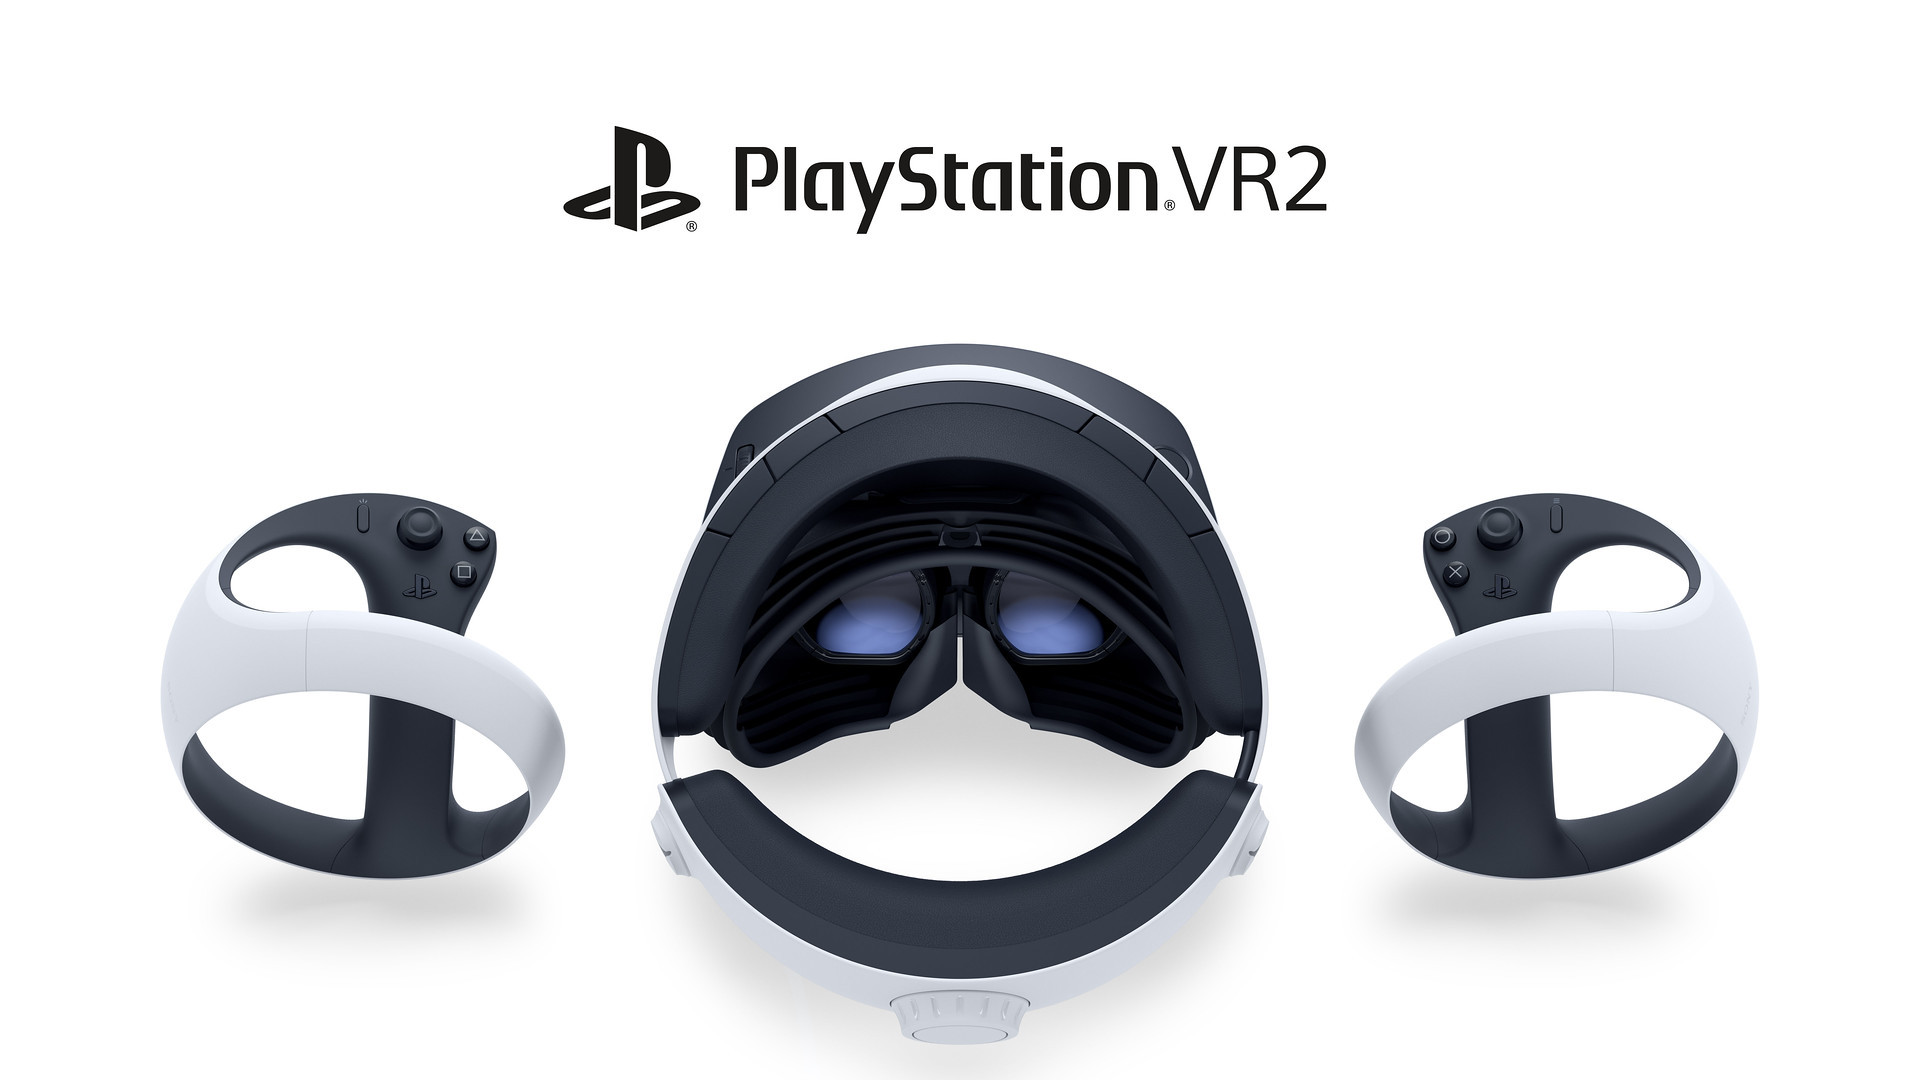 Sony should make the PSVR2 compatible with gaming PCs